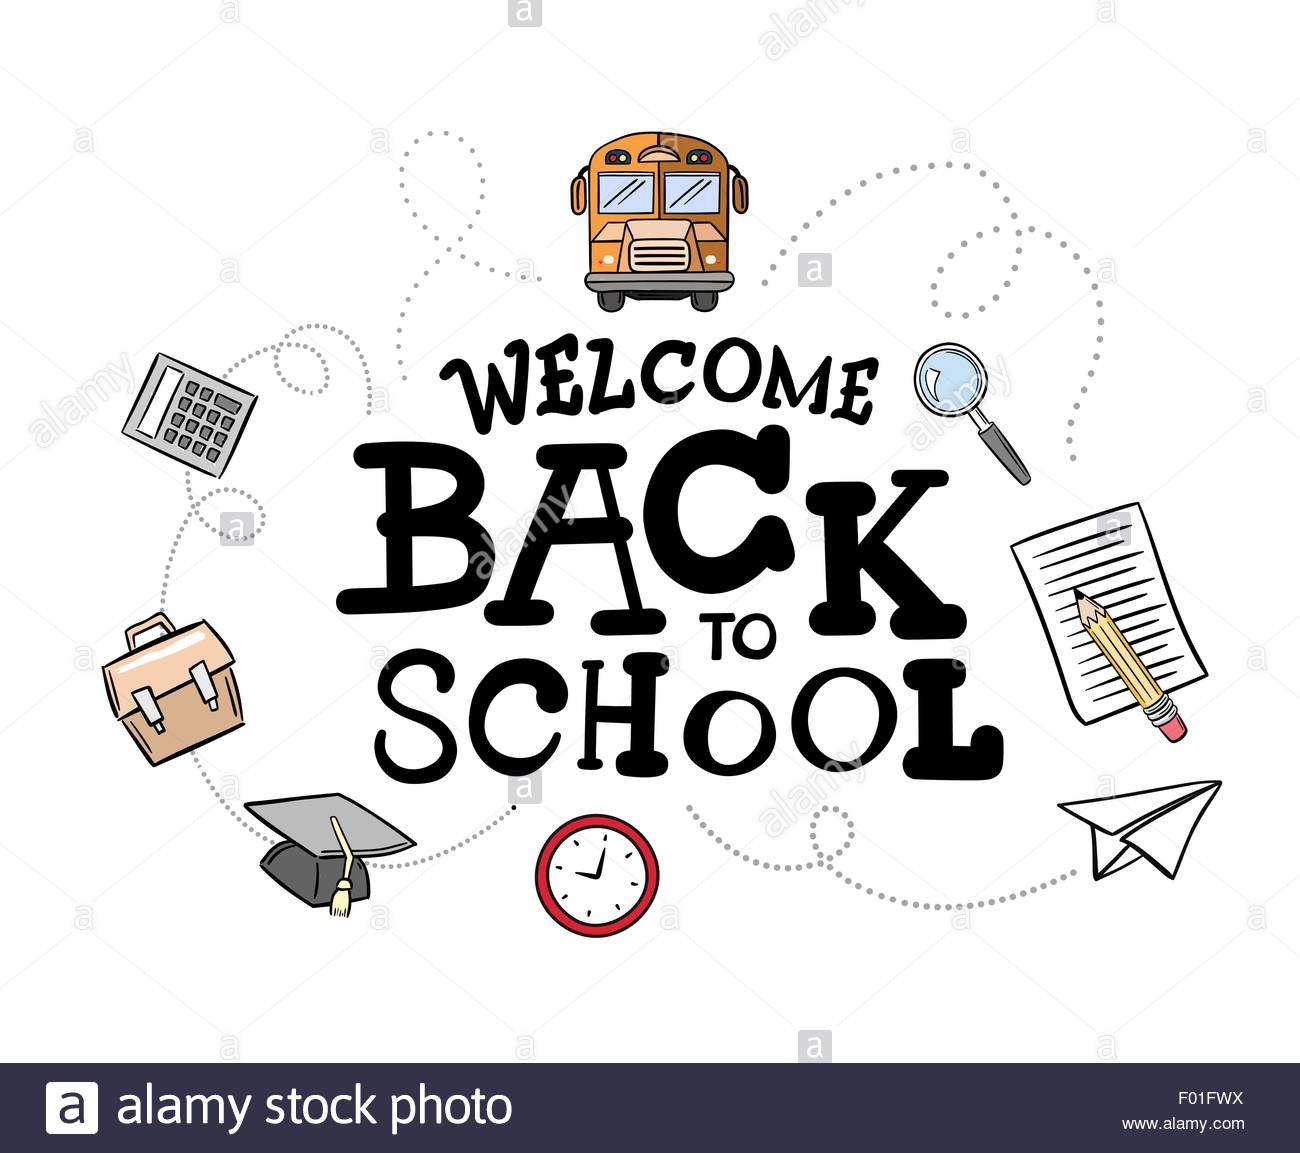 Welcome back bella how was. Welcome back to School. Welcome to School надпись. Welcome школа. Welcome back to School надпись.